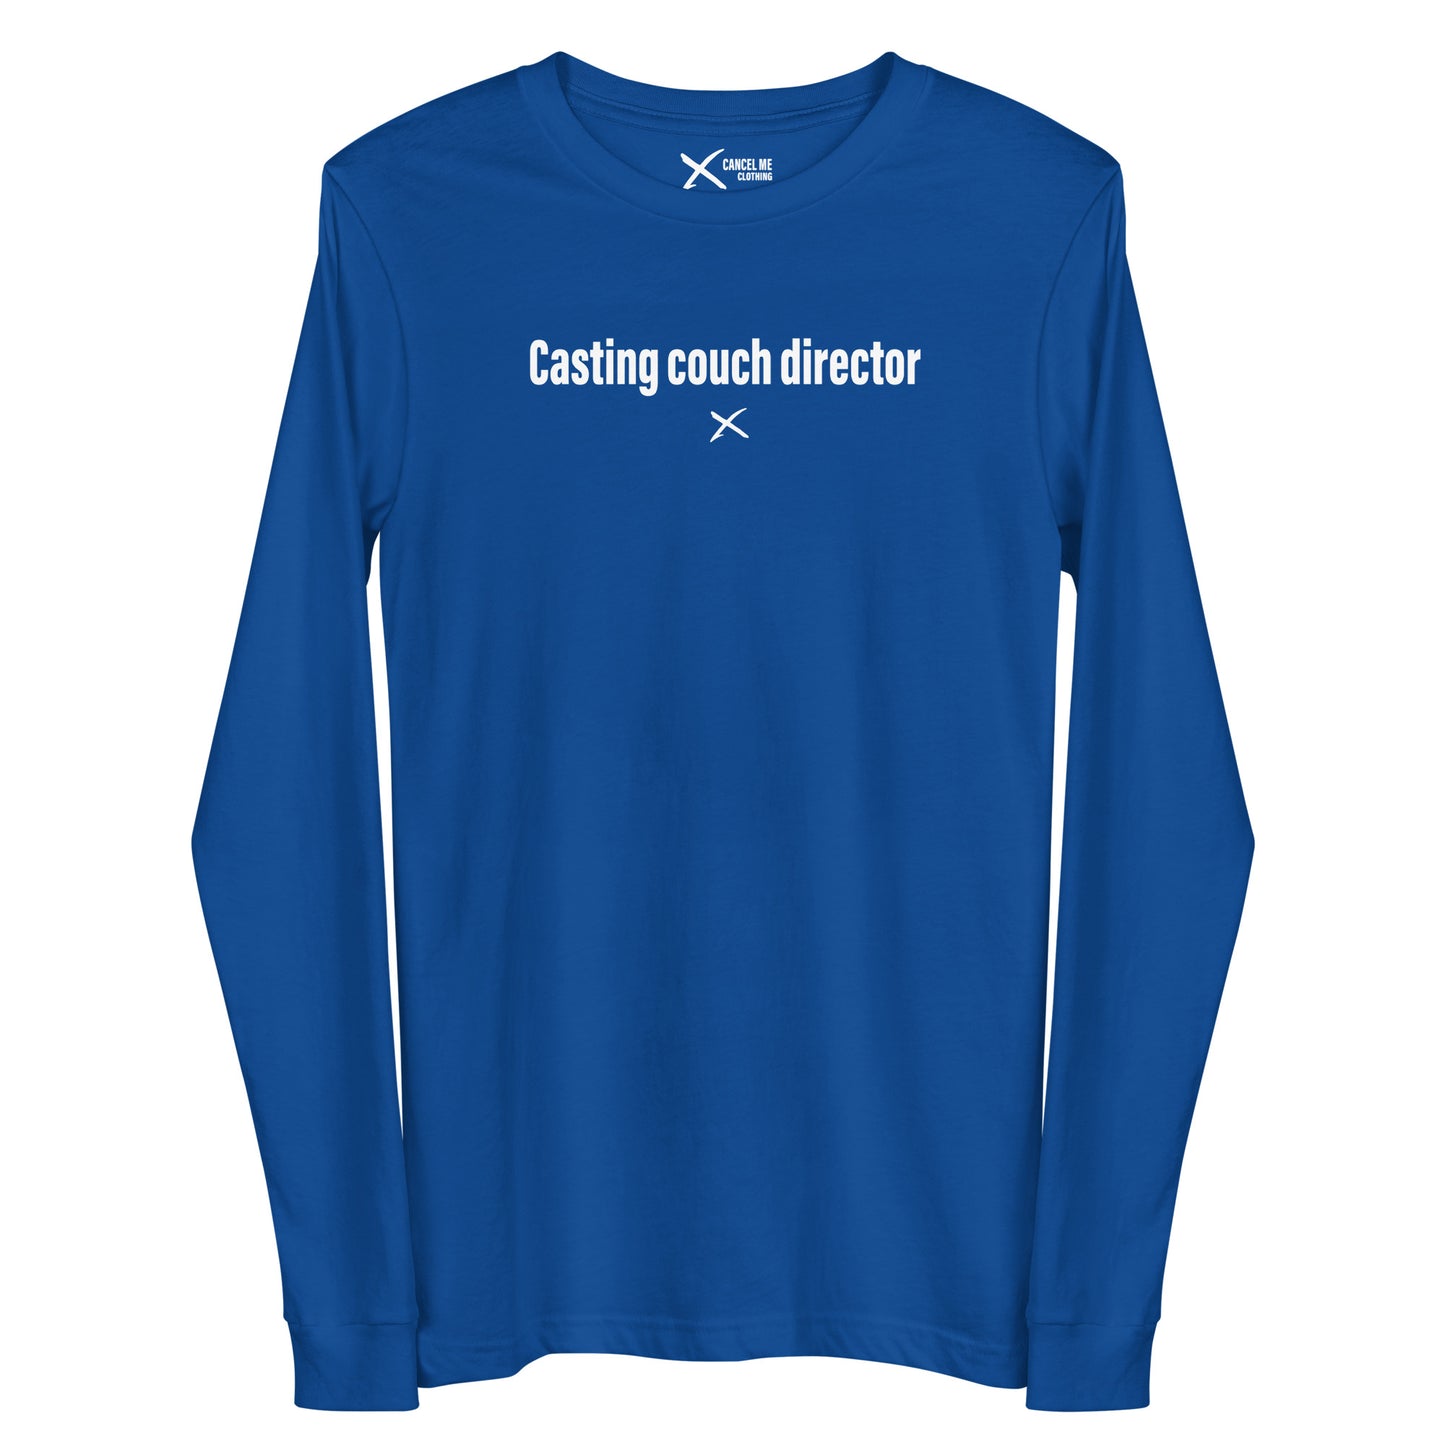 Casting couch director - Longsleeve